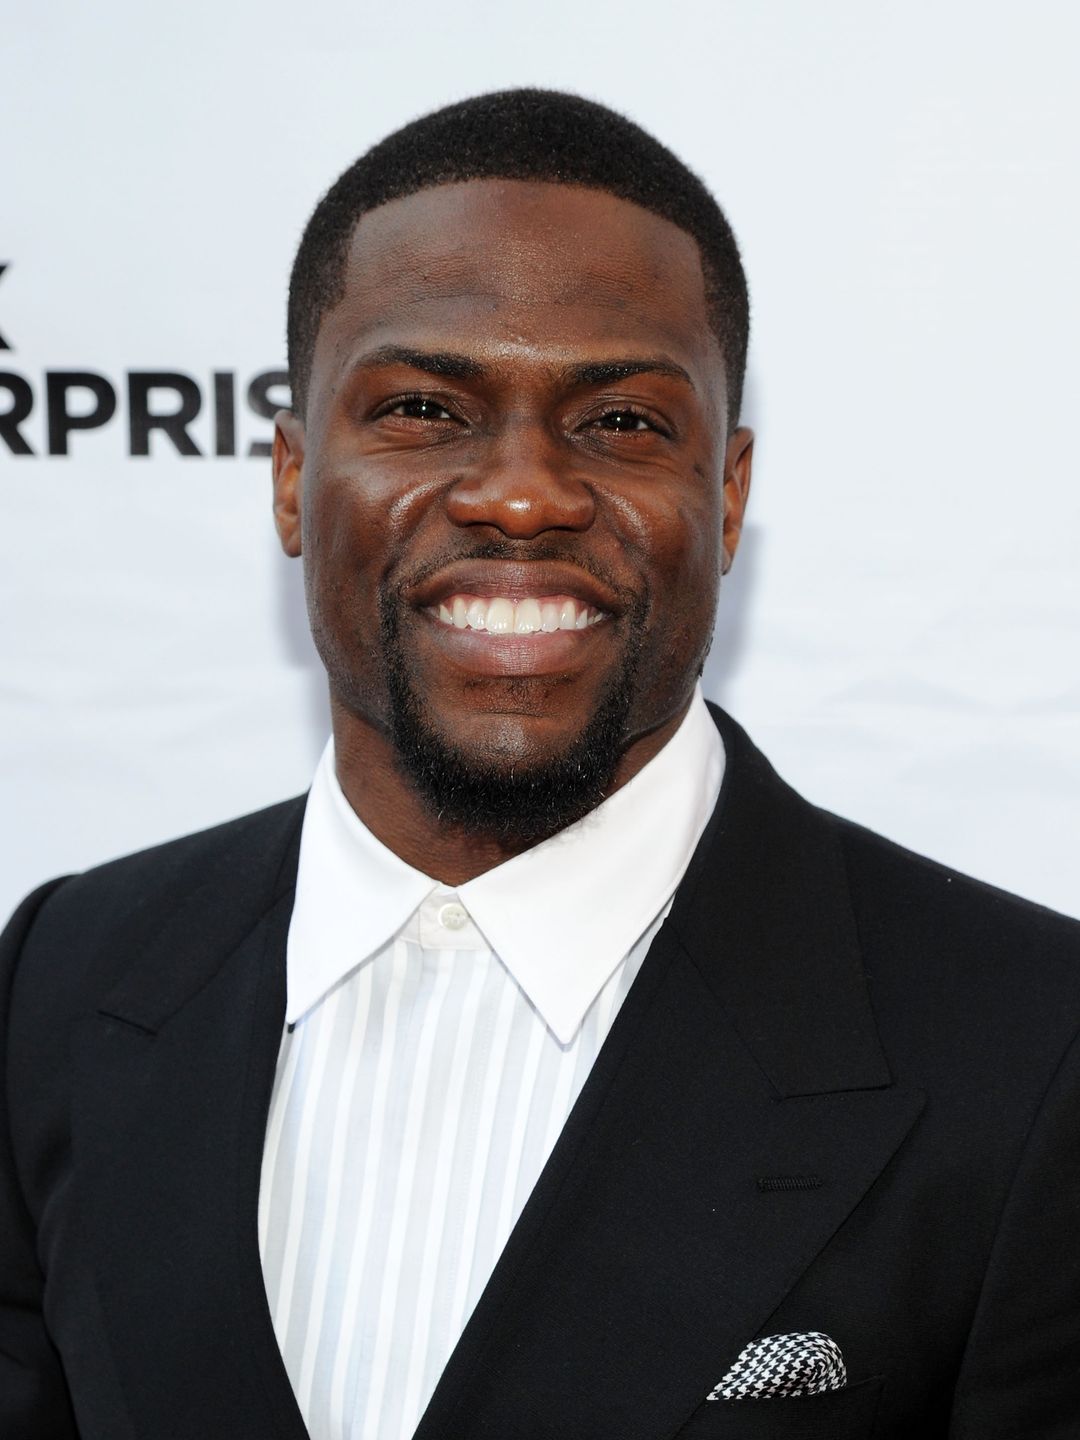 Kevin Hart personal traits